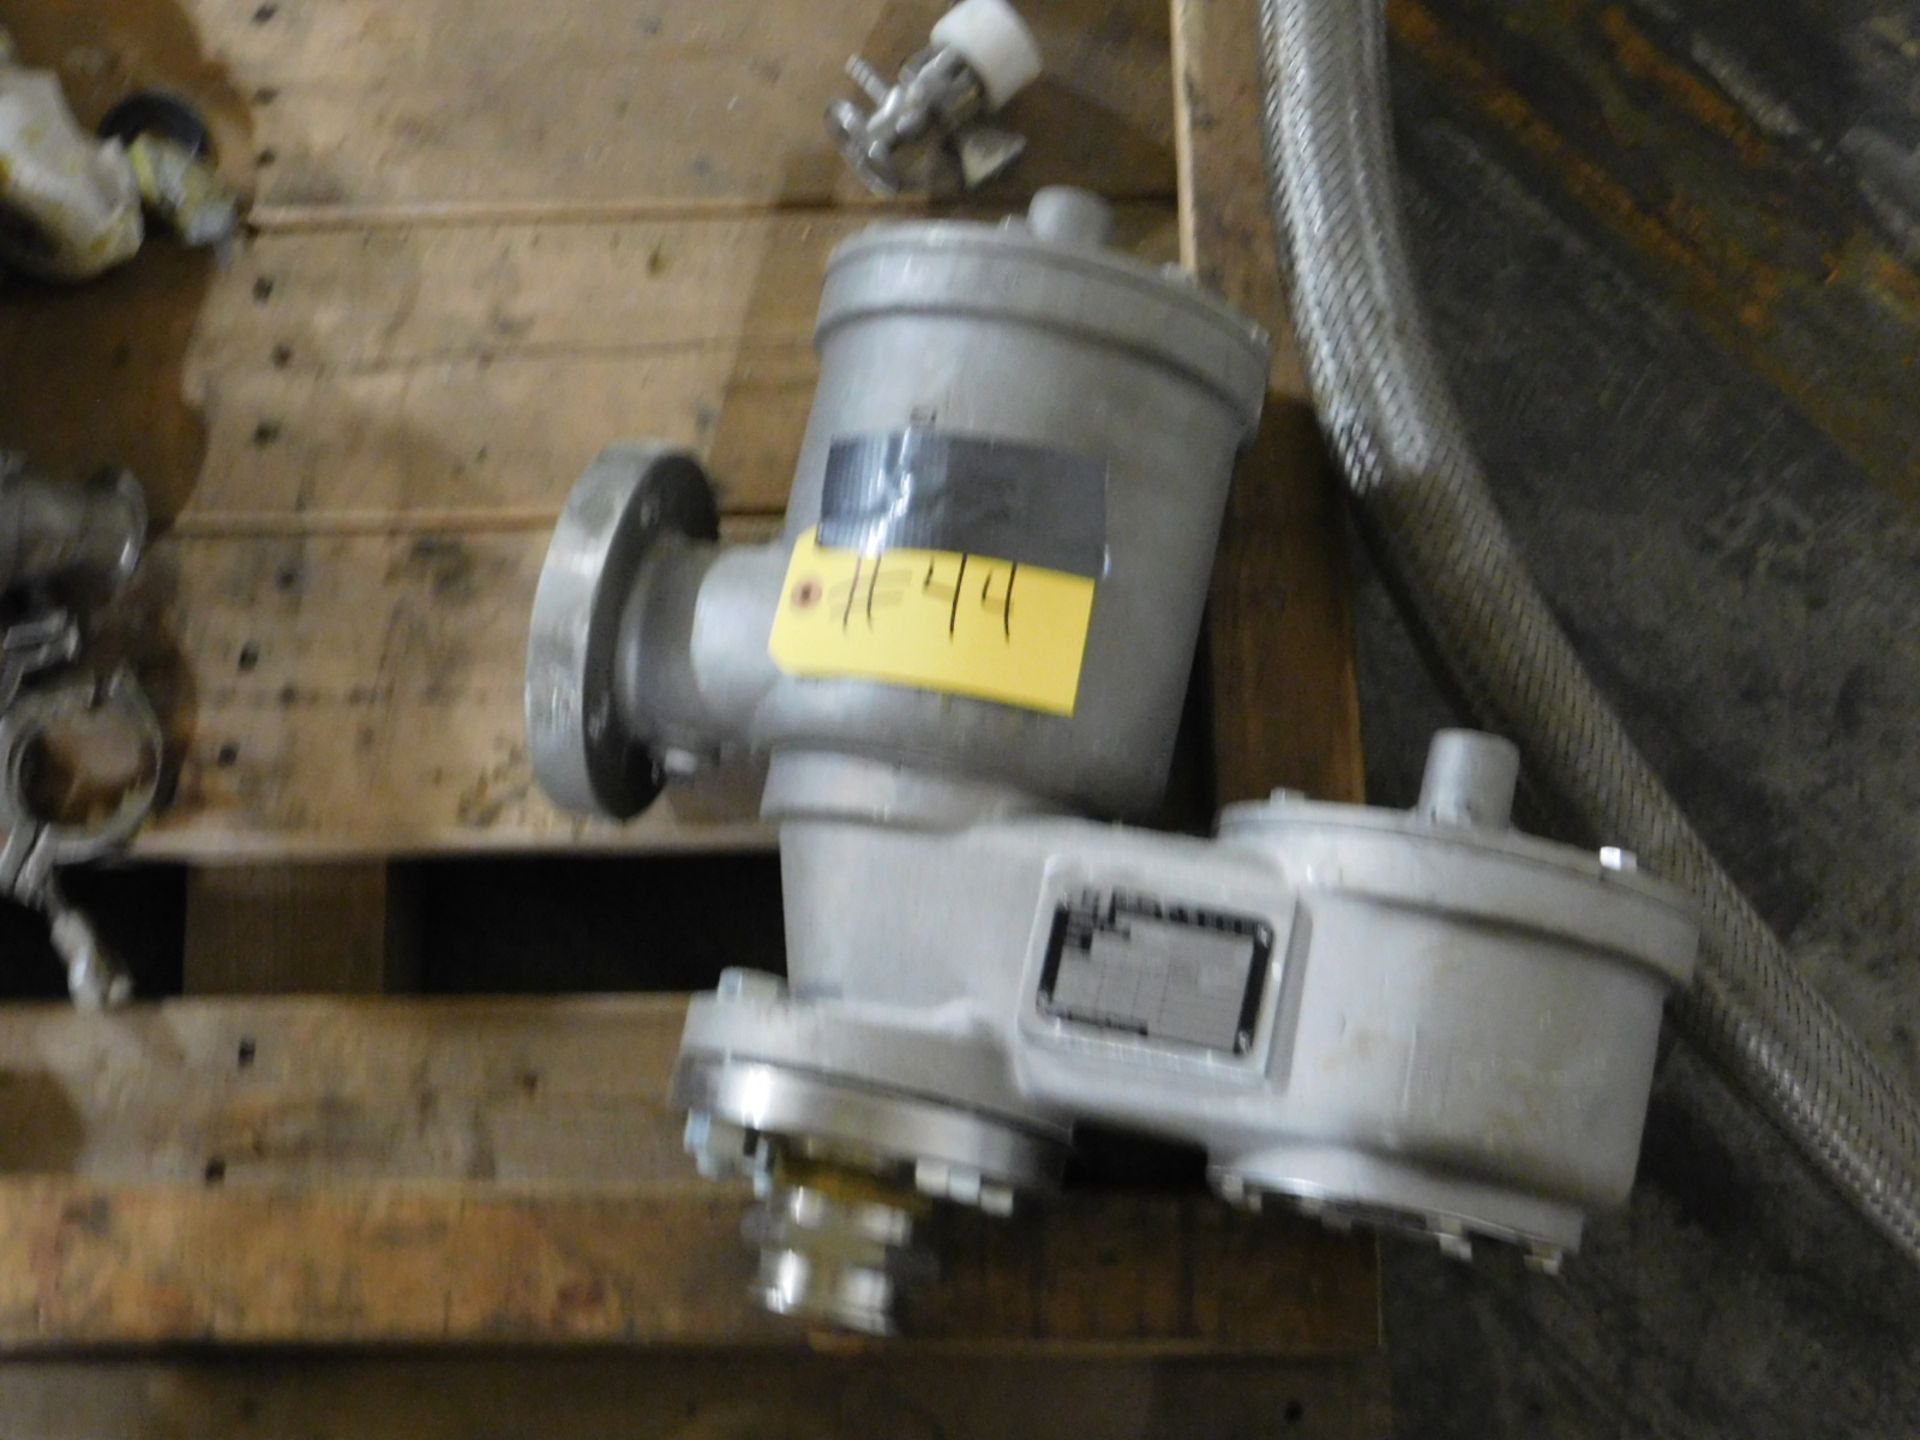 Valve Concepts inc.3222AA,2'x2" ASME FLANGE FLOW SCPH, SN:AE1105-000-09 :equipment located at - Image 7 of 7